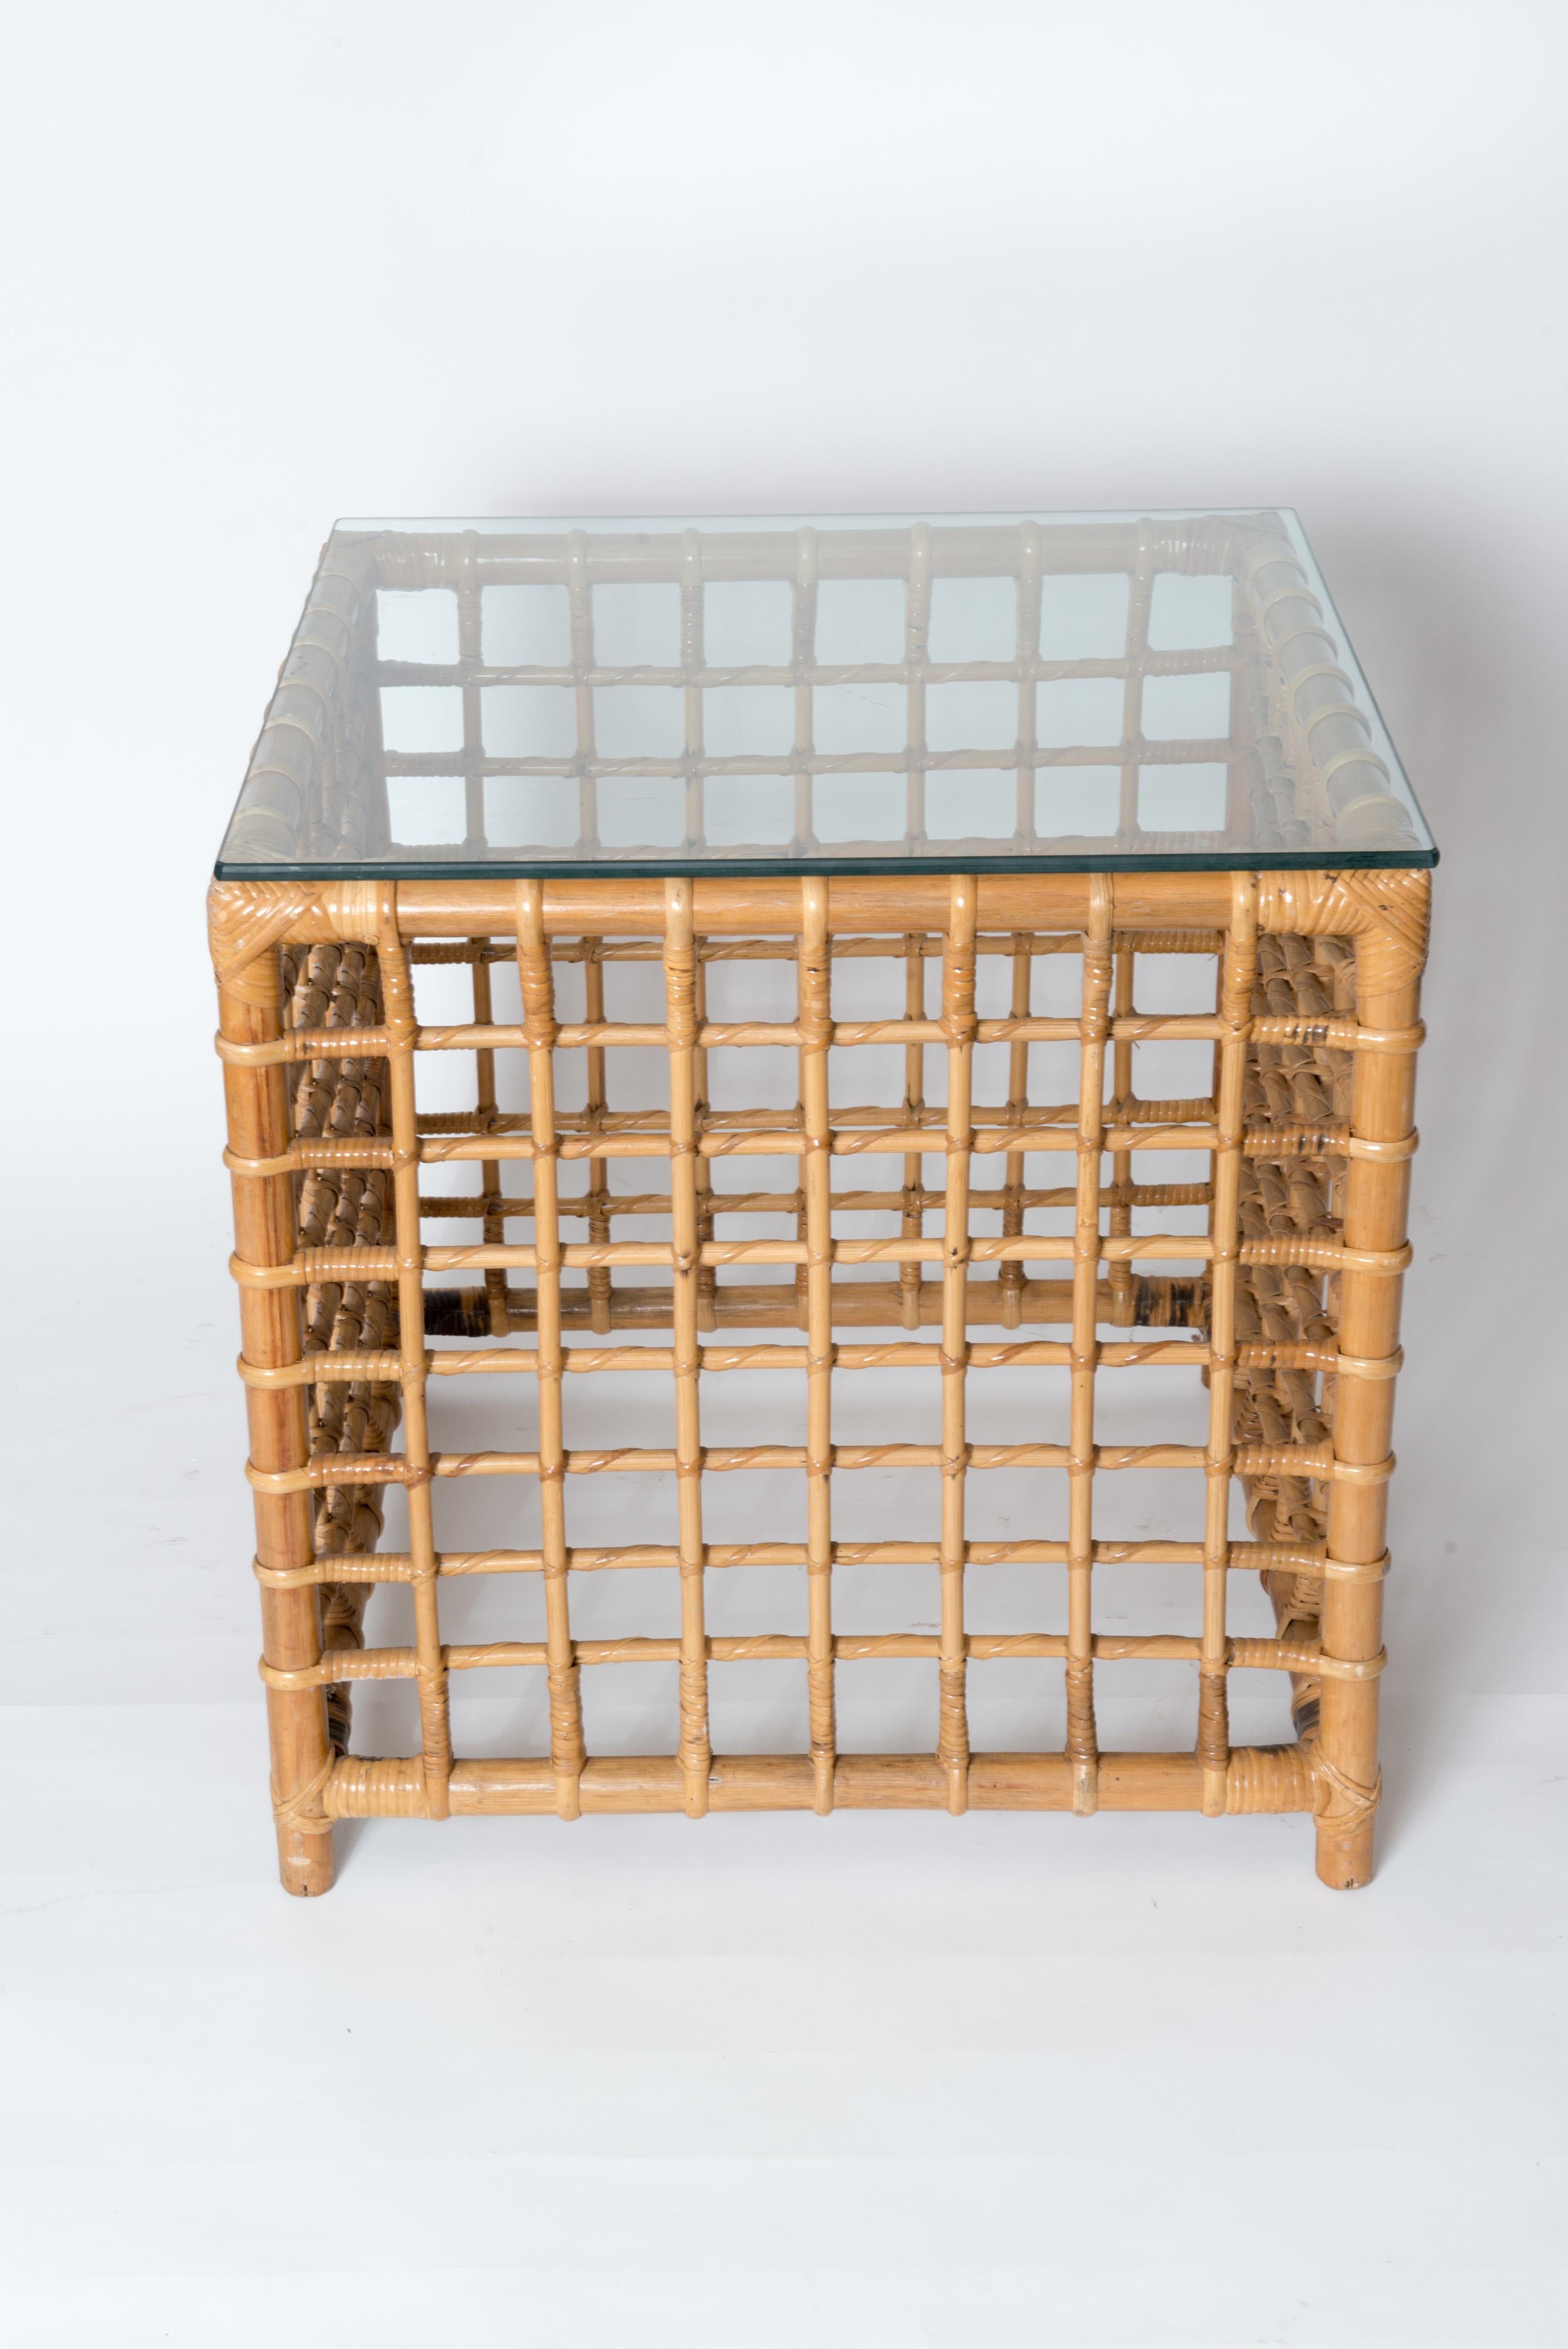 An exquisite and rare rattan cube table by accomplished Henry Olko for his 
Willow and Reed Company, circa 1975. This unique table is from Olko's Square Series. Henry Olko had a Master's degree from M.I.T.
This piece is substantial, sturdy rattan